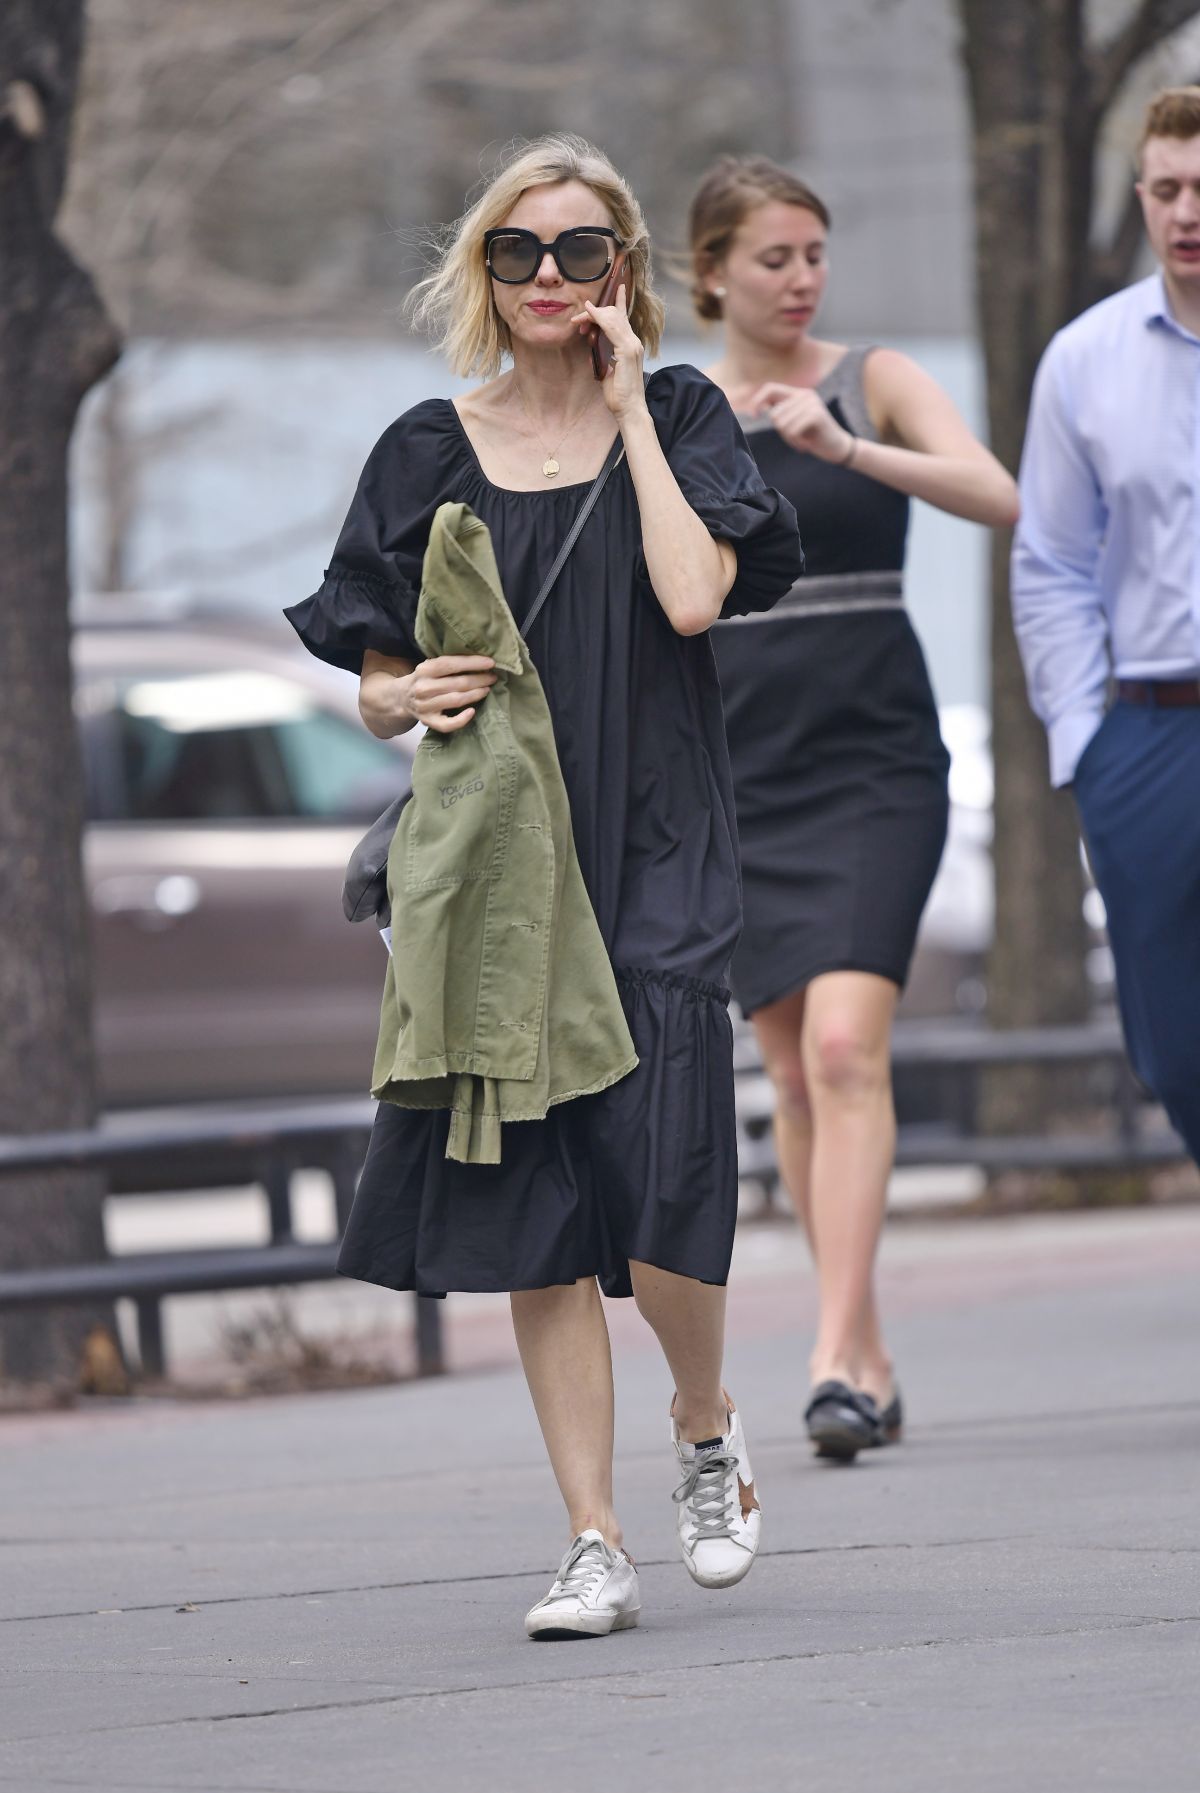 NAOMI WATTS Out and About in New York 04/08/2019 – HawtCelebs